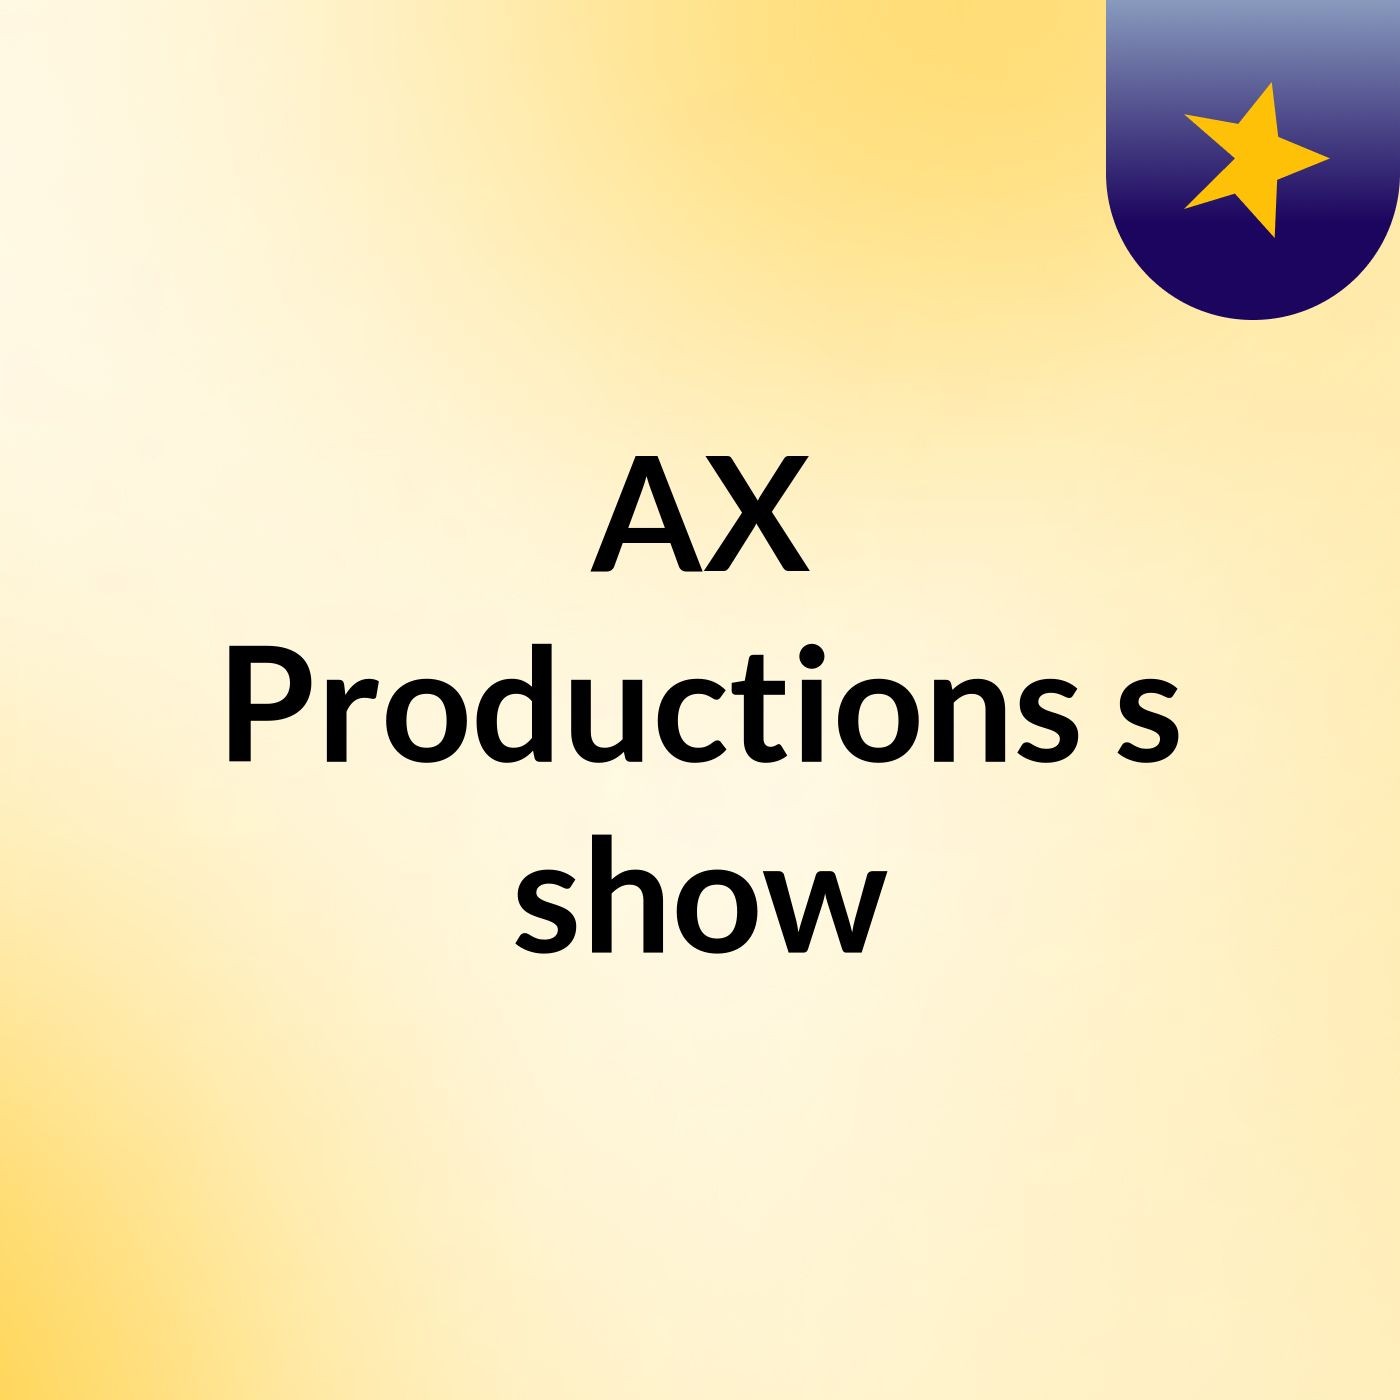 AX Productions's show